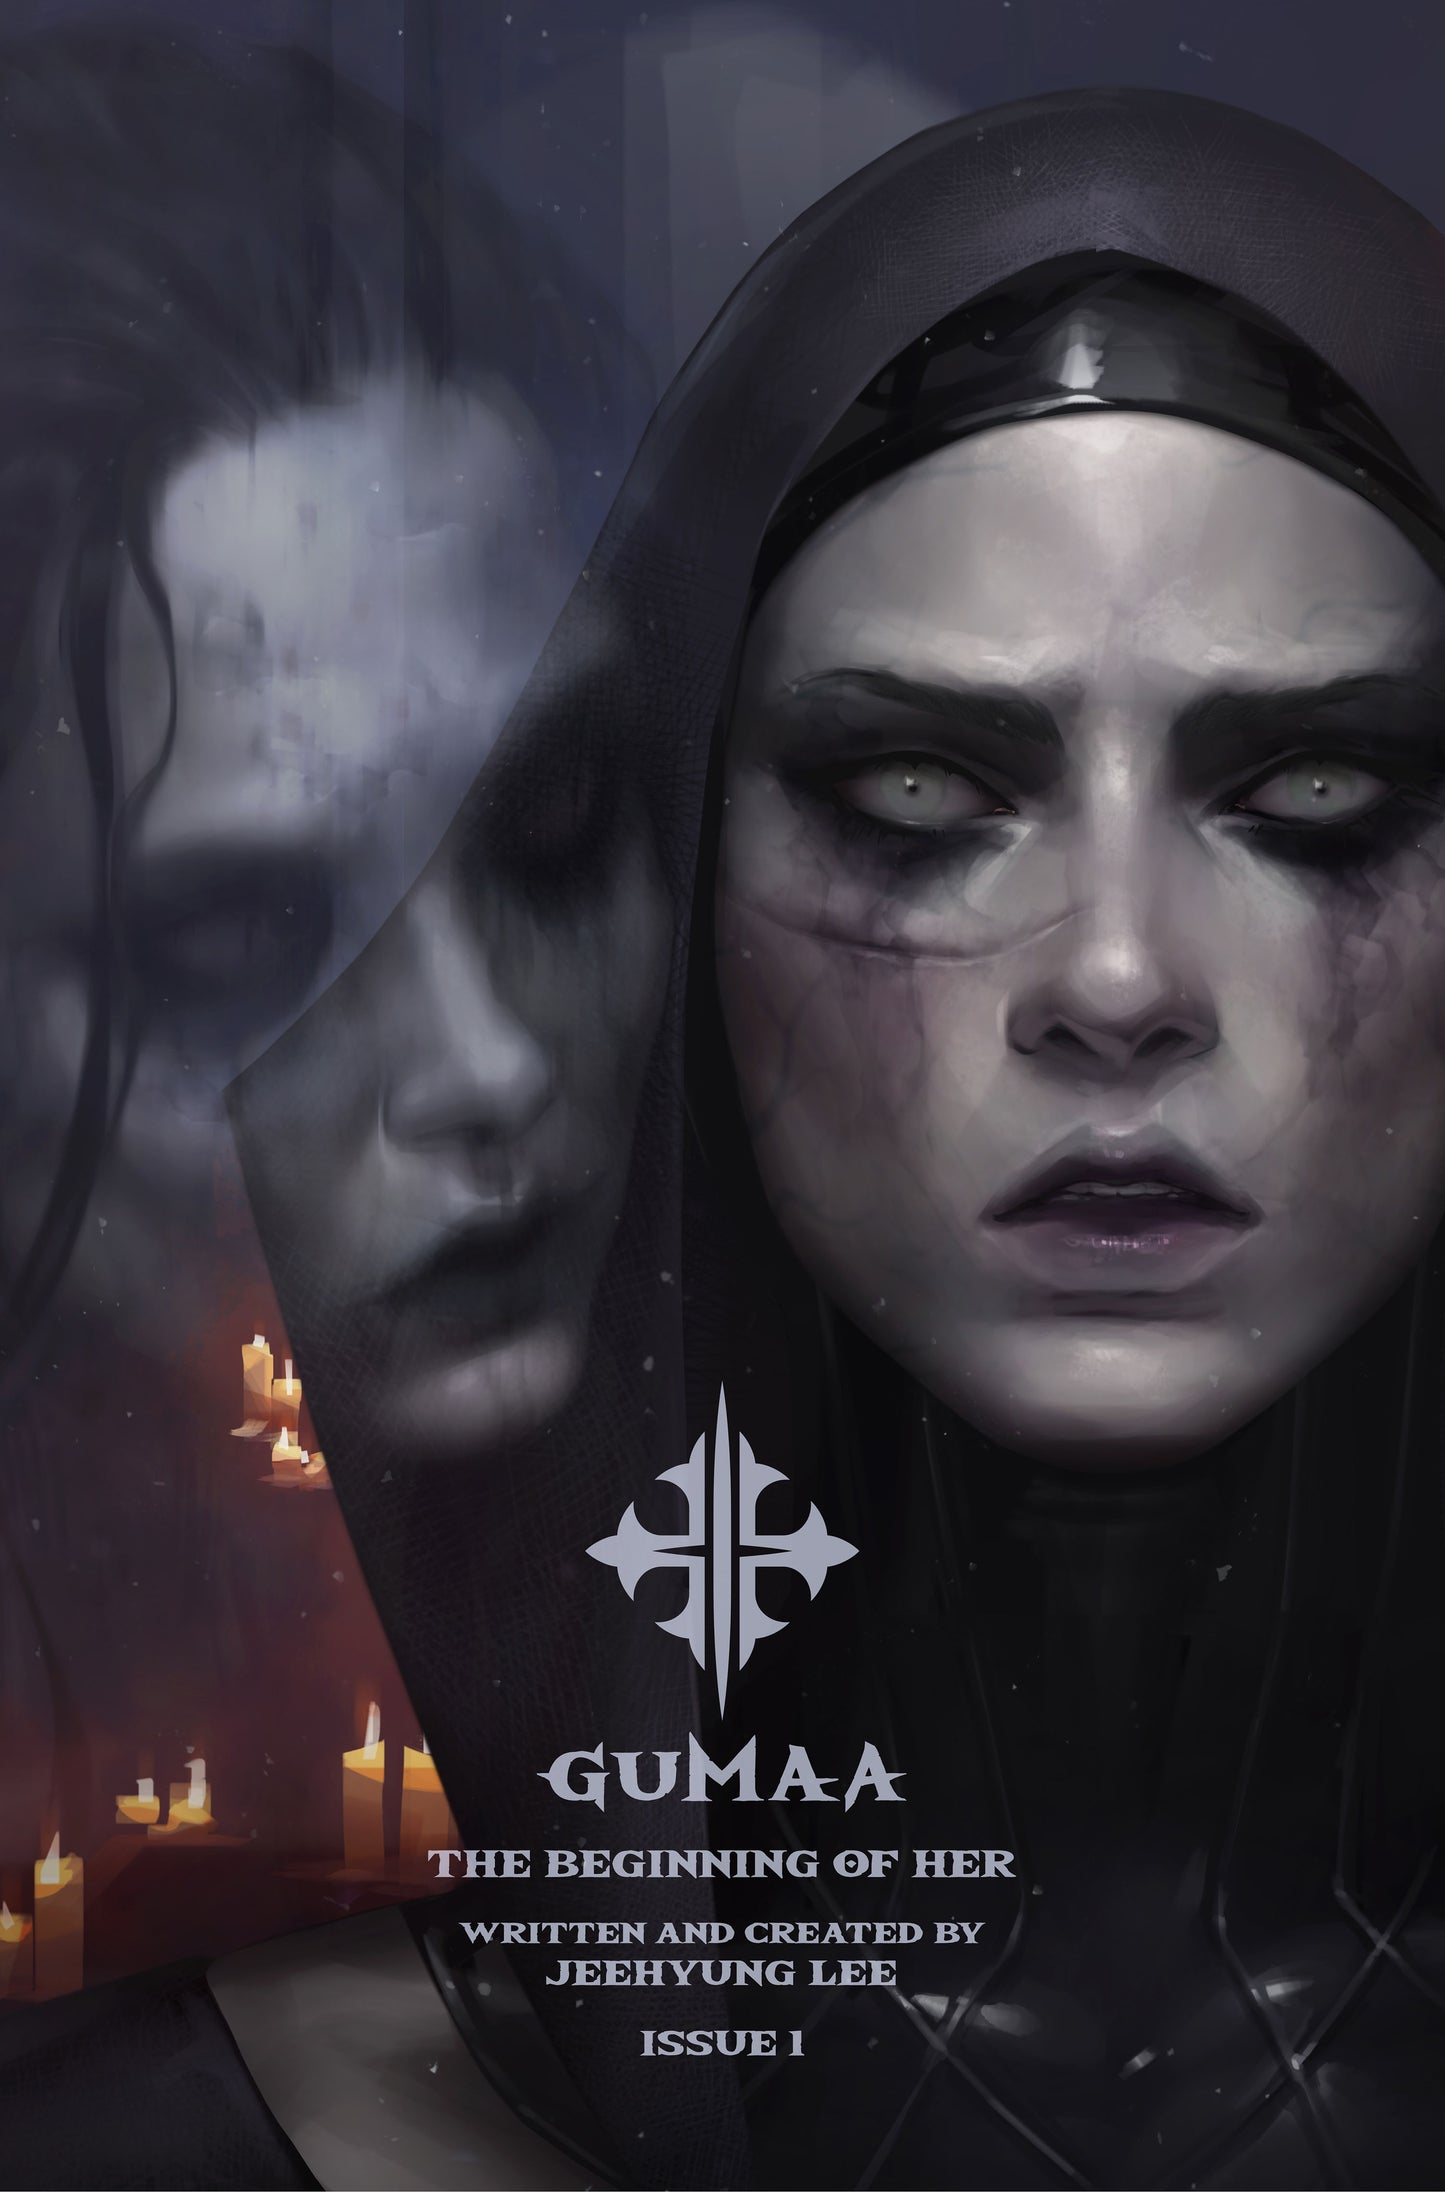 GUMAA : THE BEGINNING OF HER #1 JEEHYUNG LEE RARE KICKSTARTER VARIANT COVER A